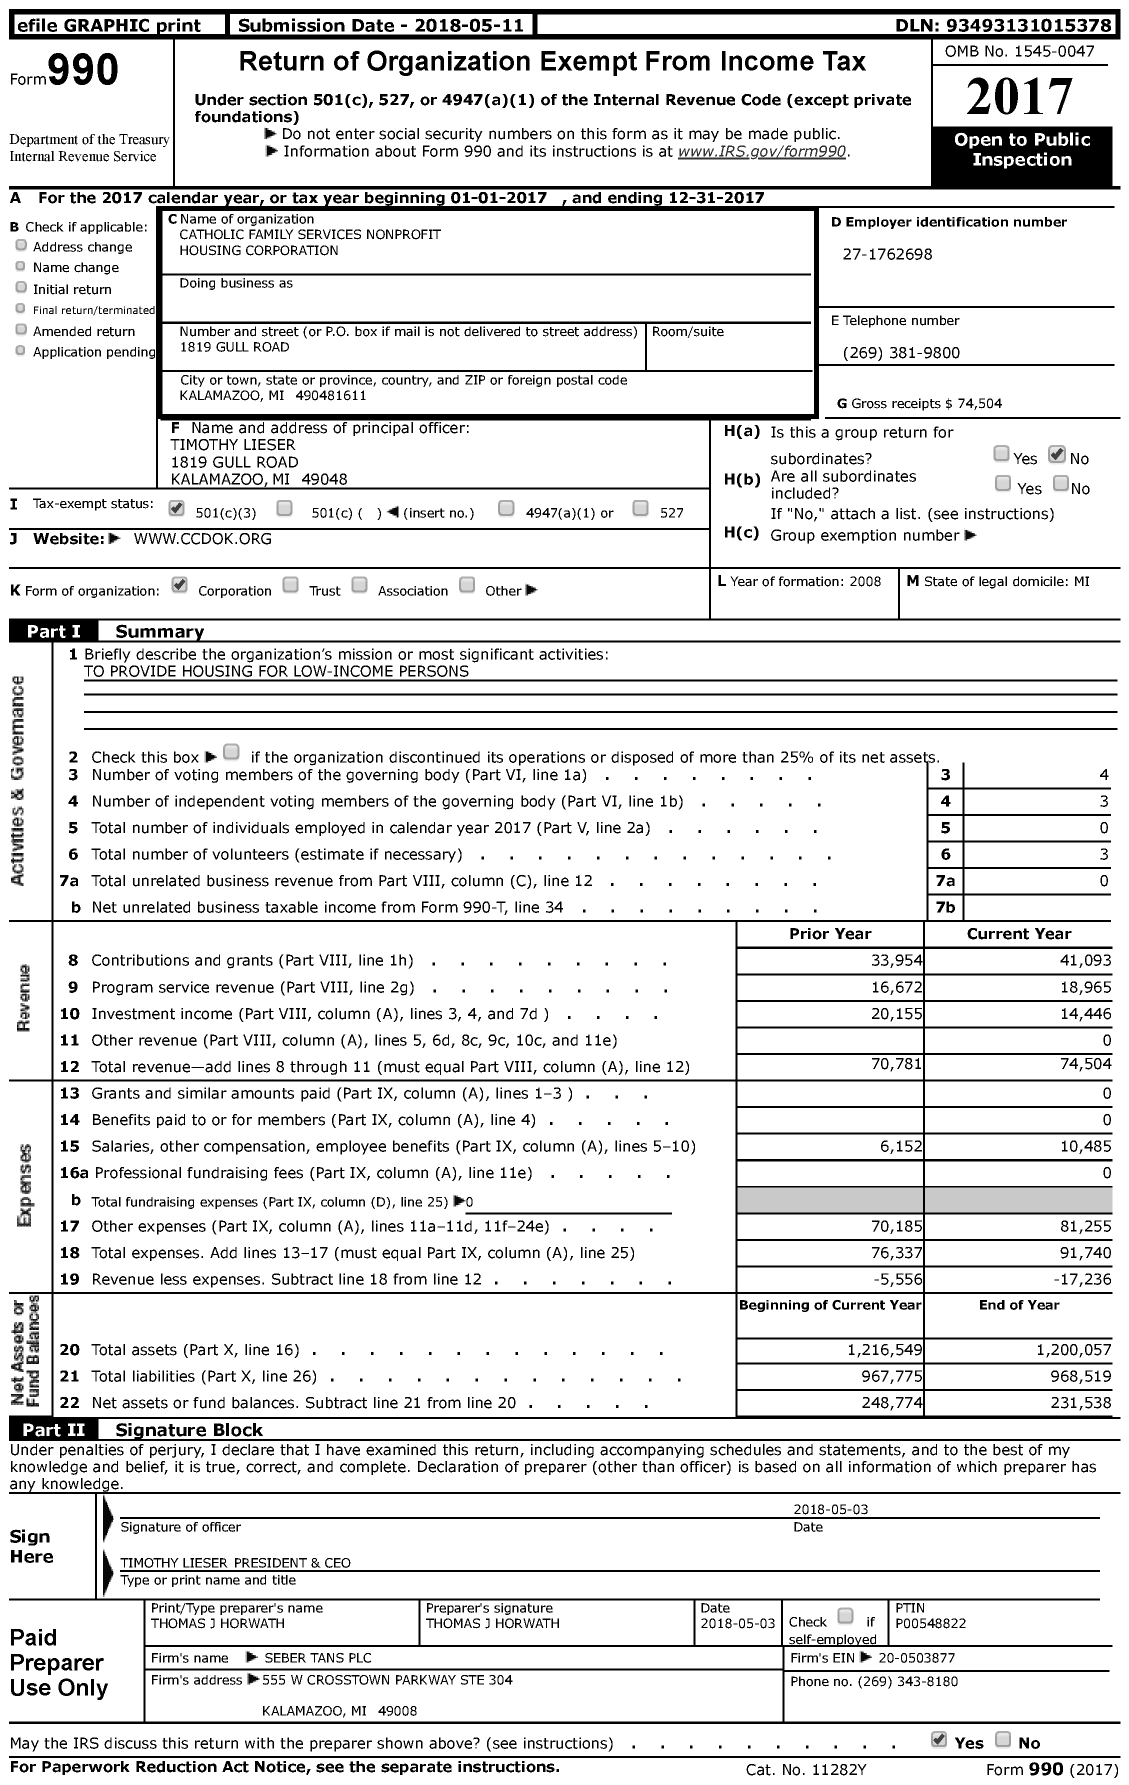 Image of first page of 2017 Form 990 for Catholic Family Services Nonprofit Housing Corporation